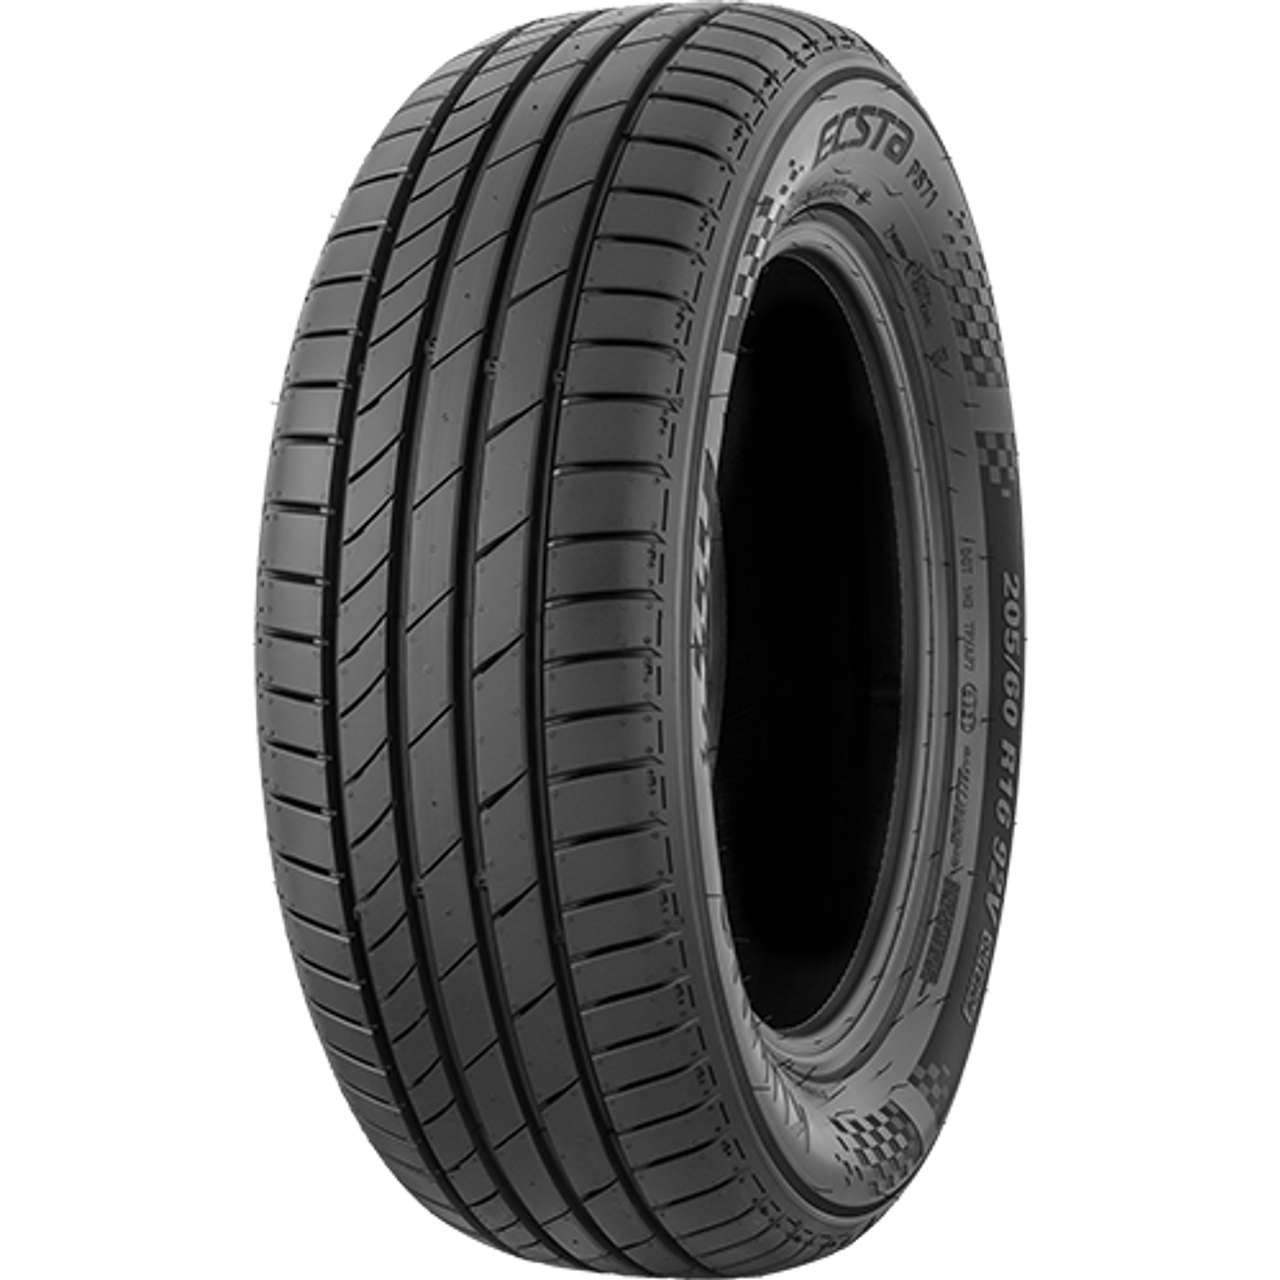 KUMHO ECSTA PS71 255/35ZR19 96Y BSW